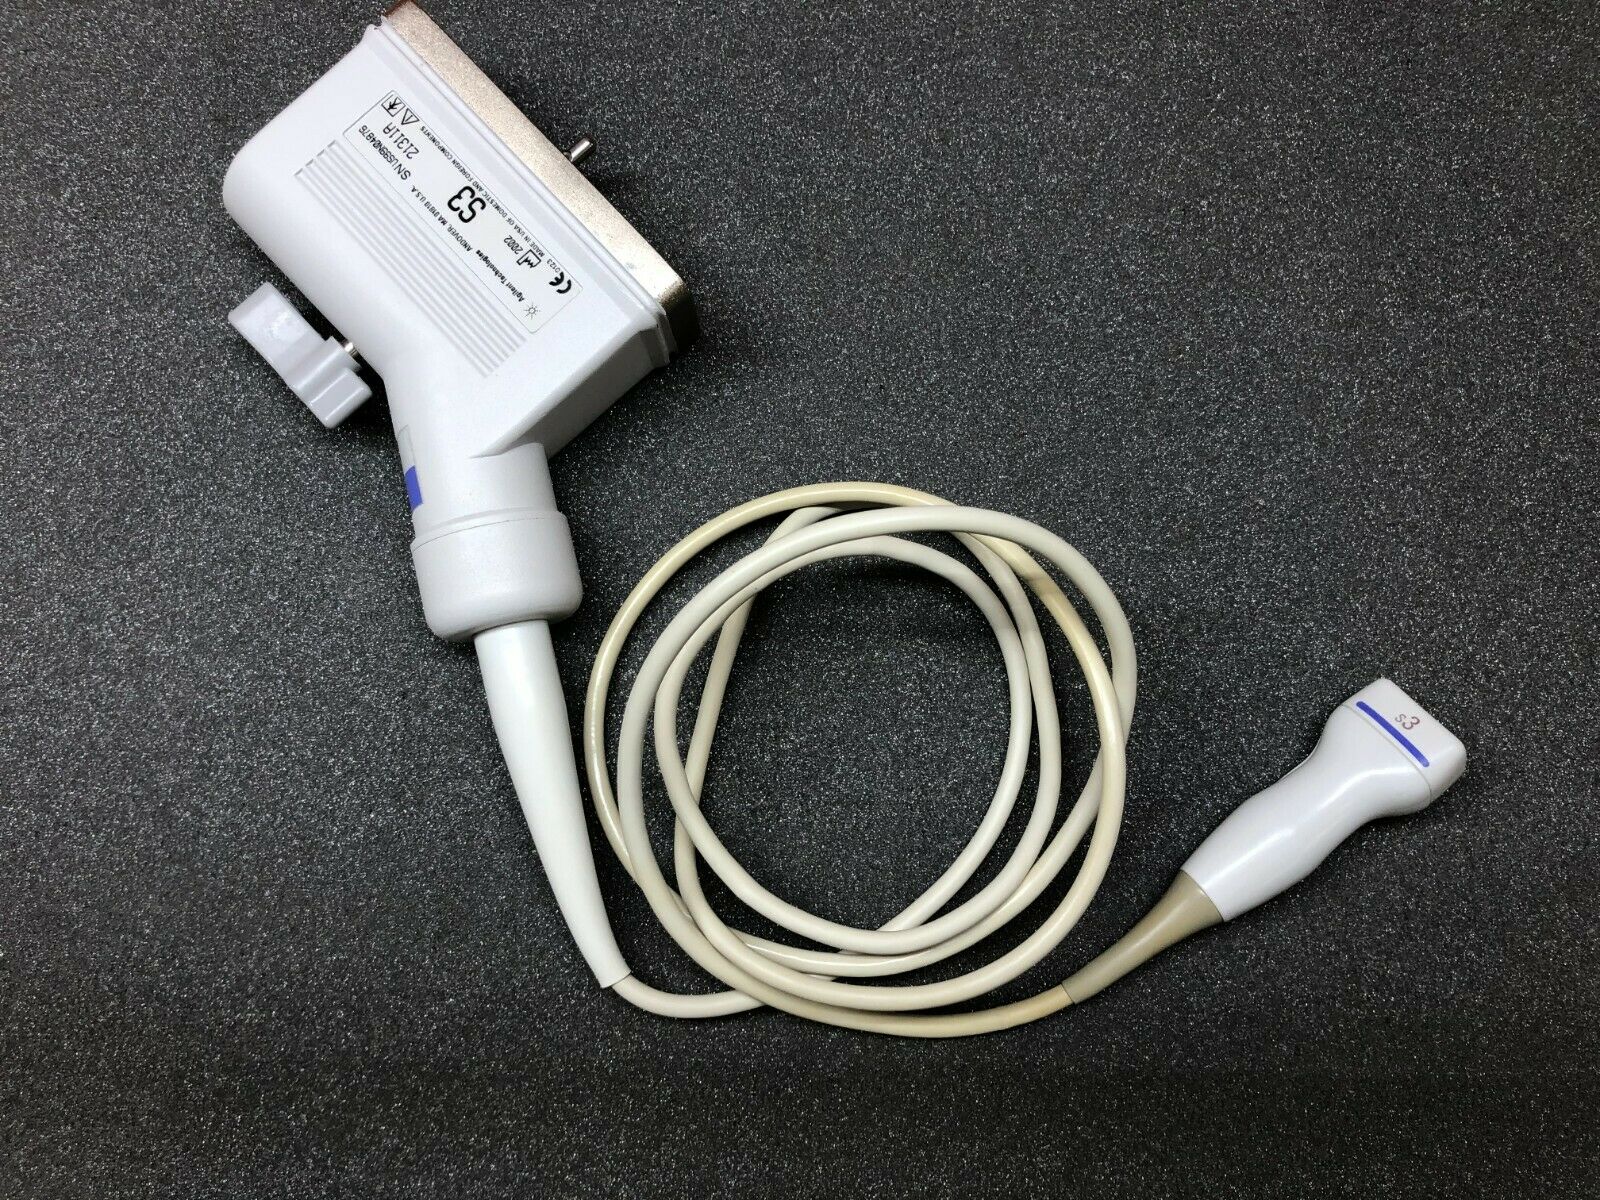 HP 21311A S3 Phased Array Ultrasound Transducer Probe DIAGNOSTIC ULTRASOUND MACHINES FOR SALE